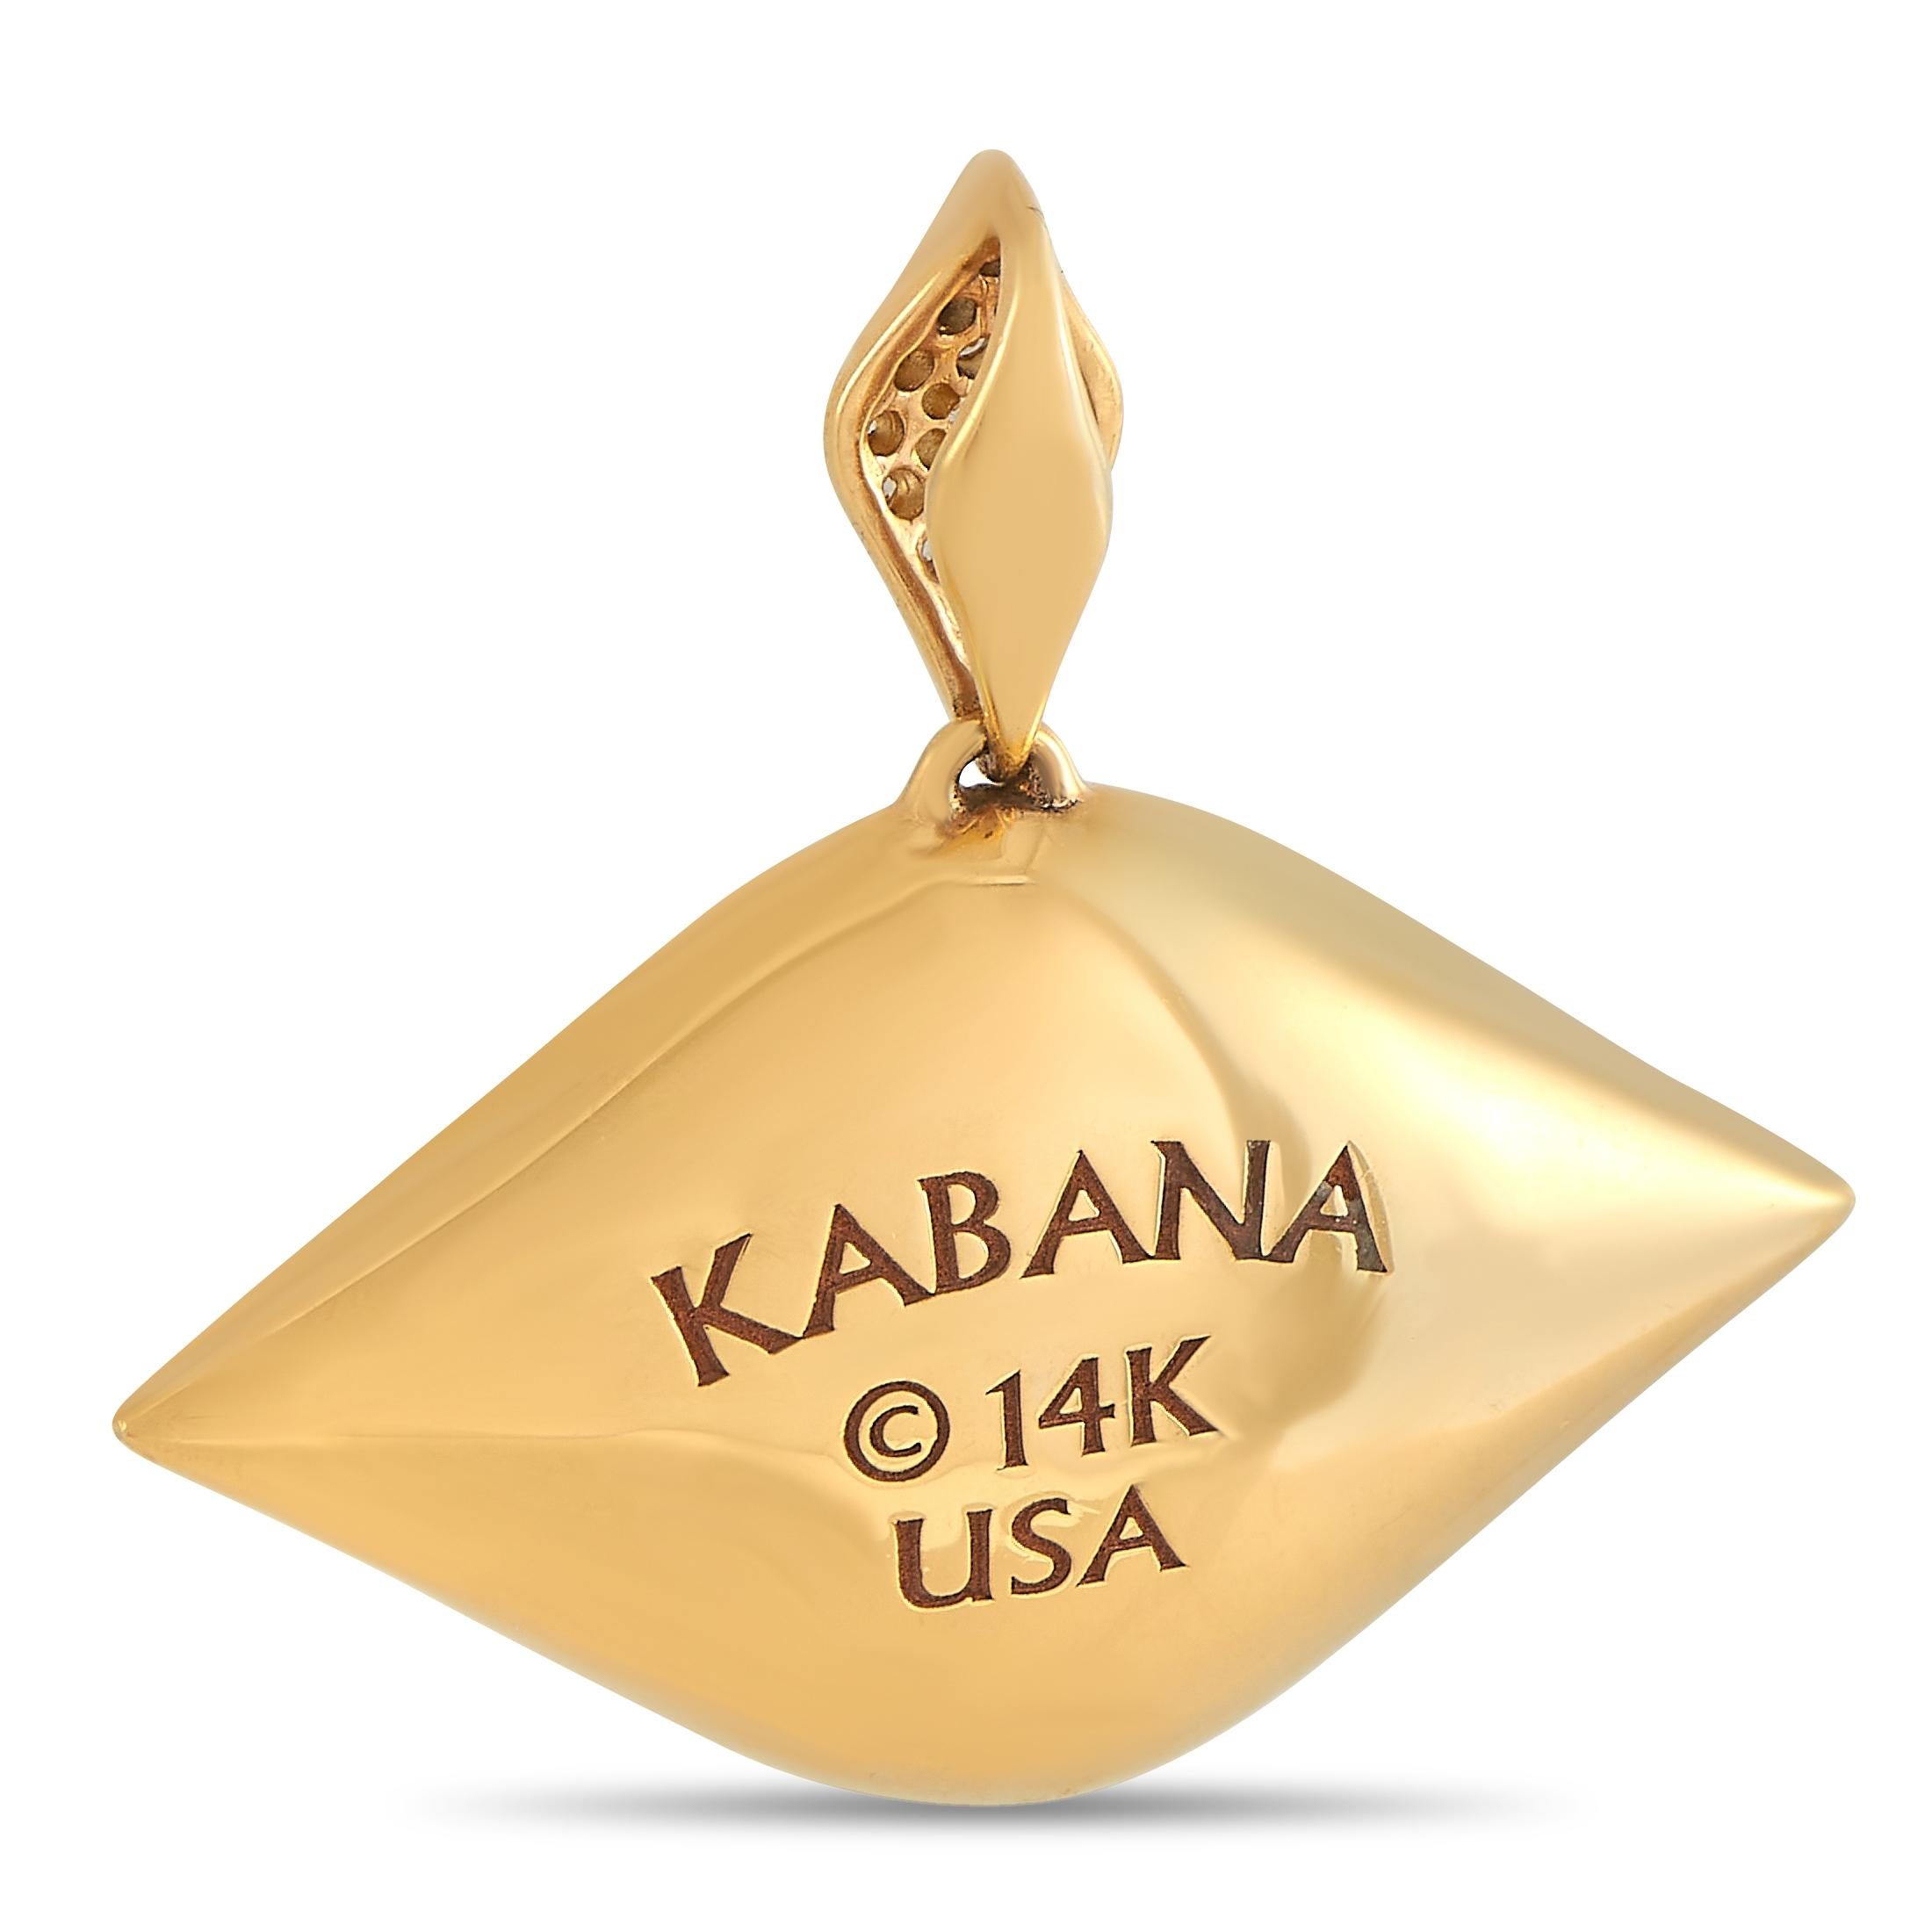 This Kabana 14K Yellow Gold 0.55 ct Diamond Mother of Pearl Turquoise Evil Eye Pendant is made with 14K yellow gold. The face of the pendant is set with an inlay of white mother of pearl and vibrant turquoise, forming an Evil Eye which is accented